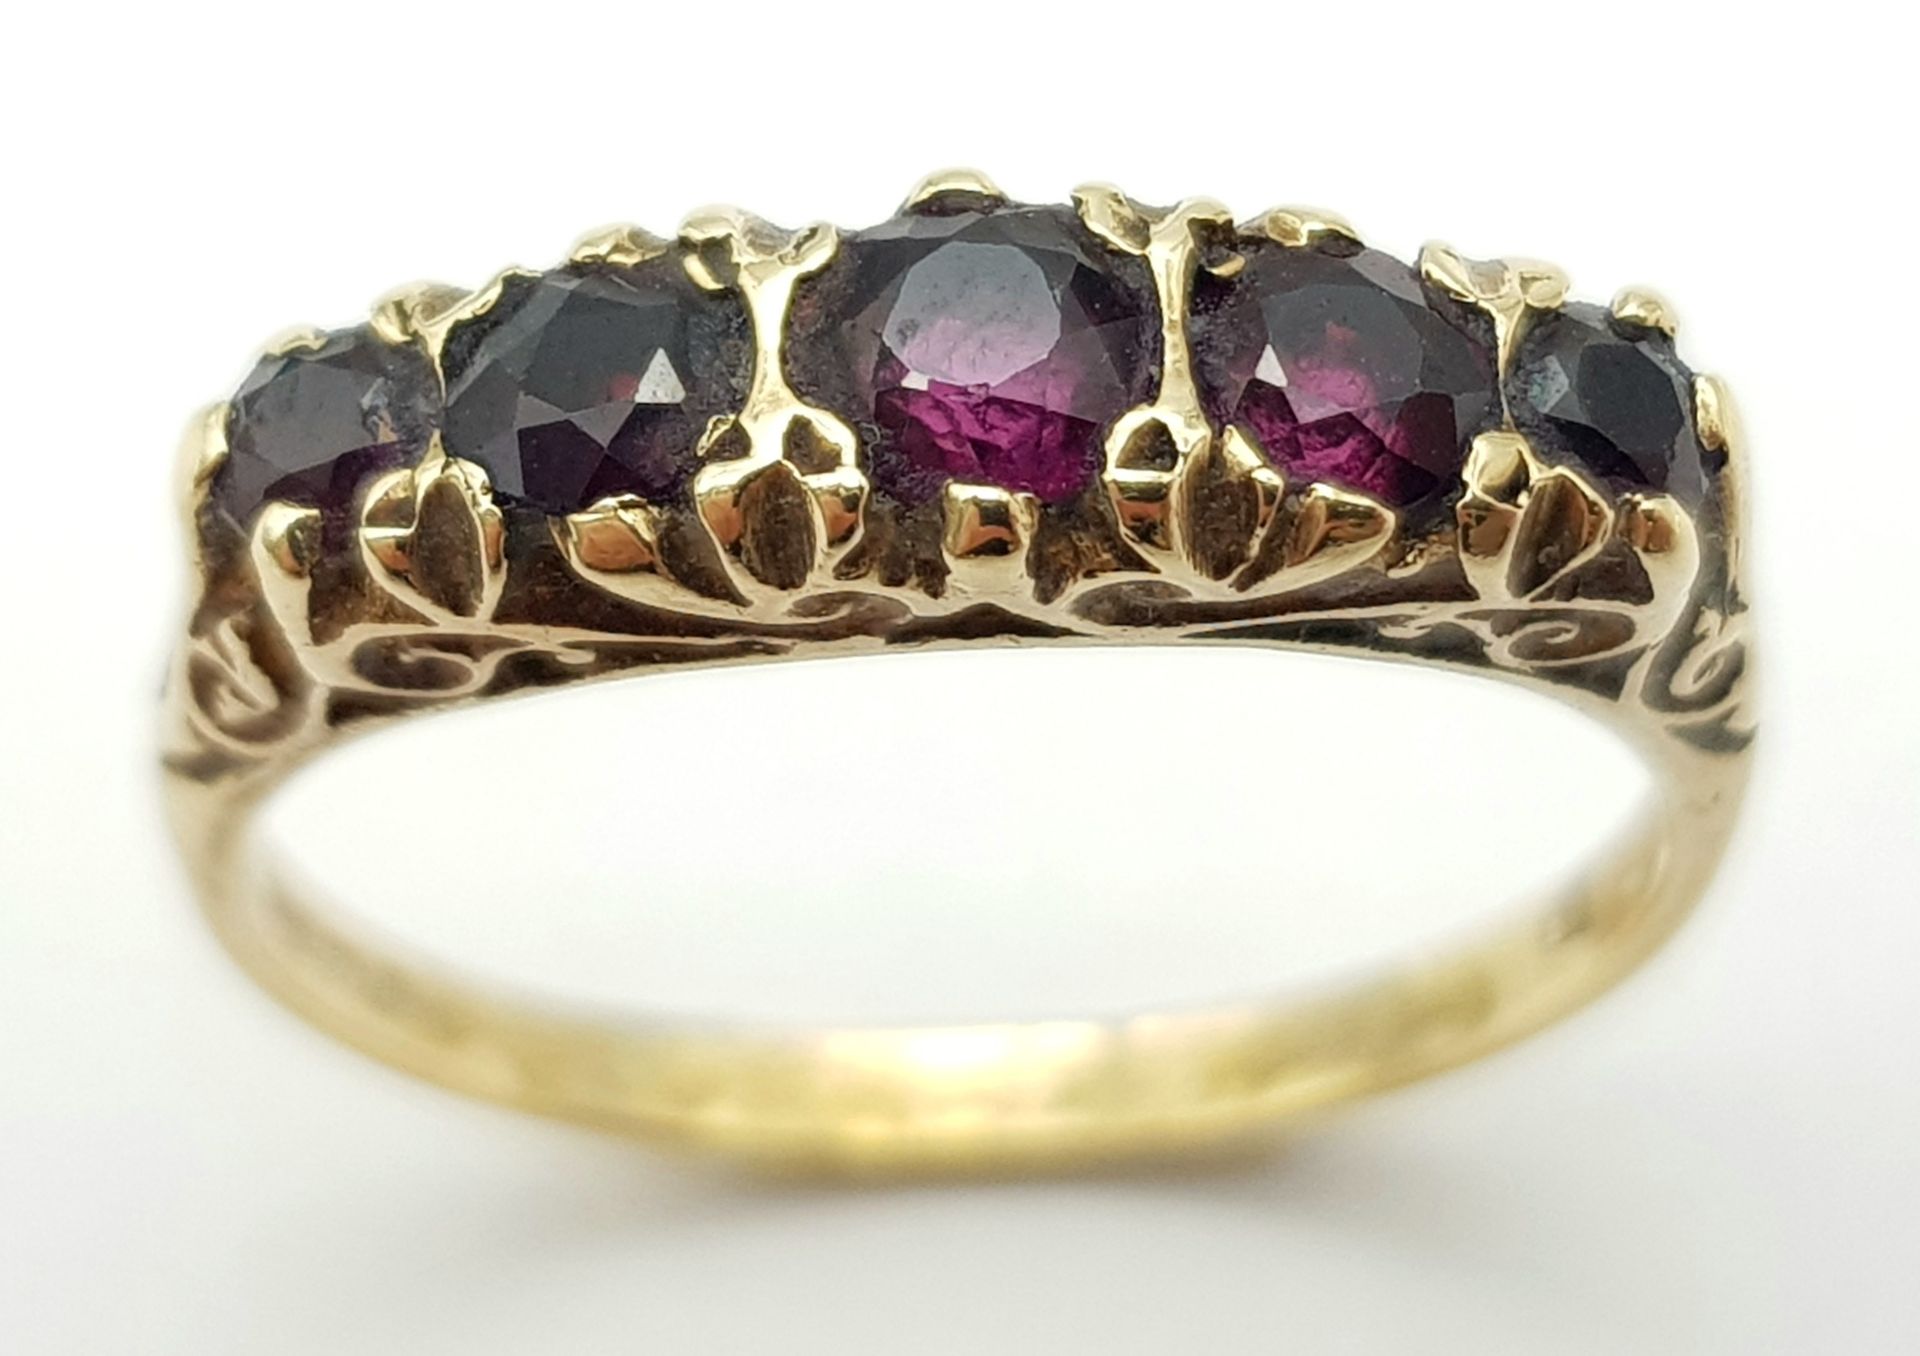 A Vintage 9K Yellow Gold Five Stone Garnet Ring. Size R. 2.8g total weight. - Image 2 of 5